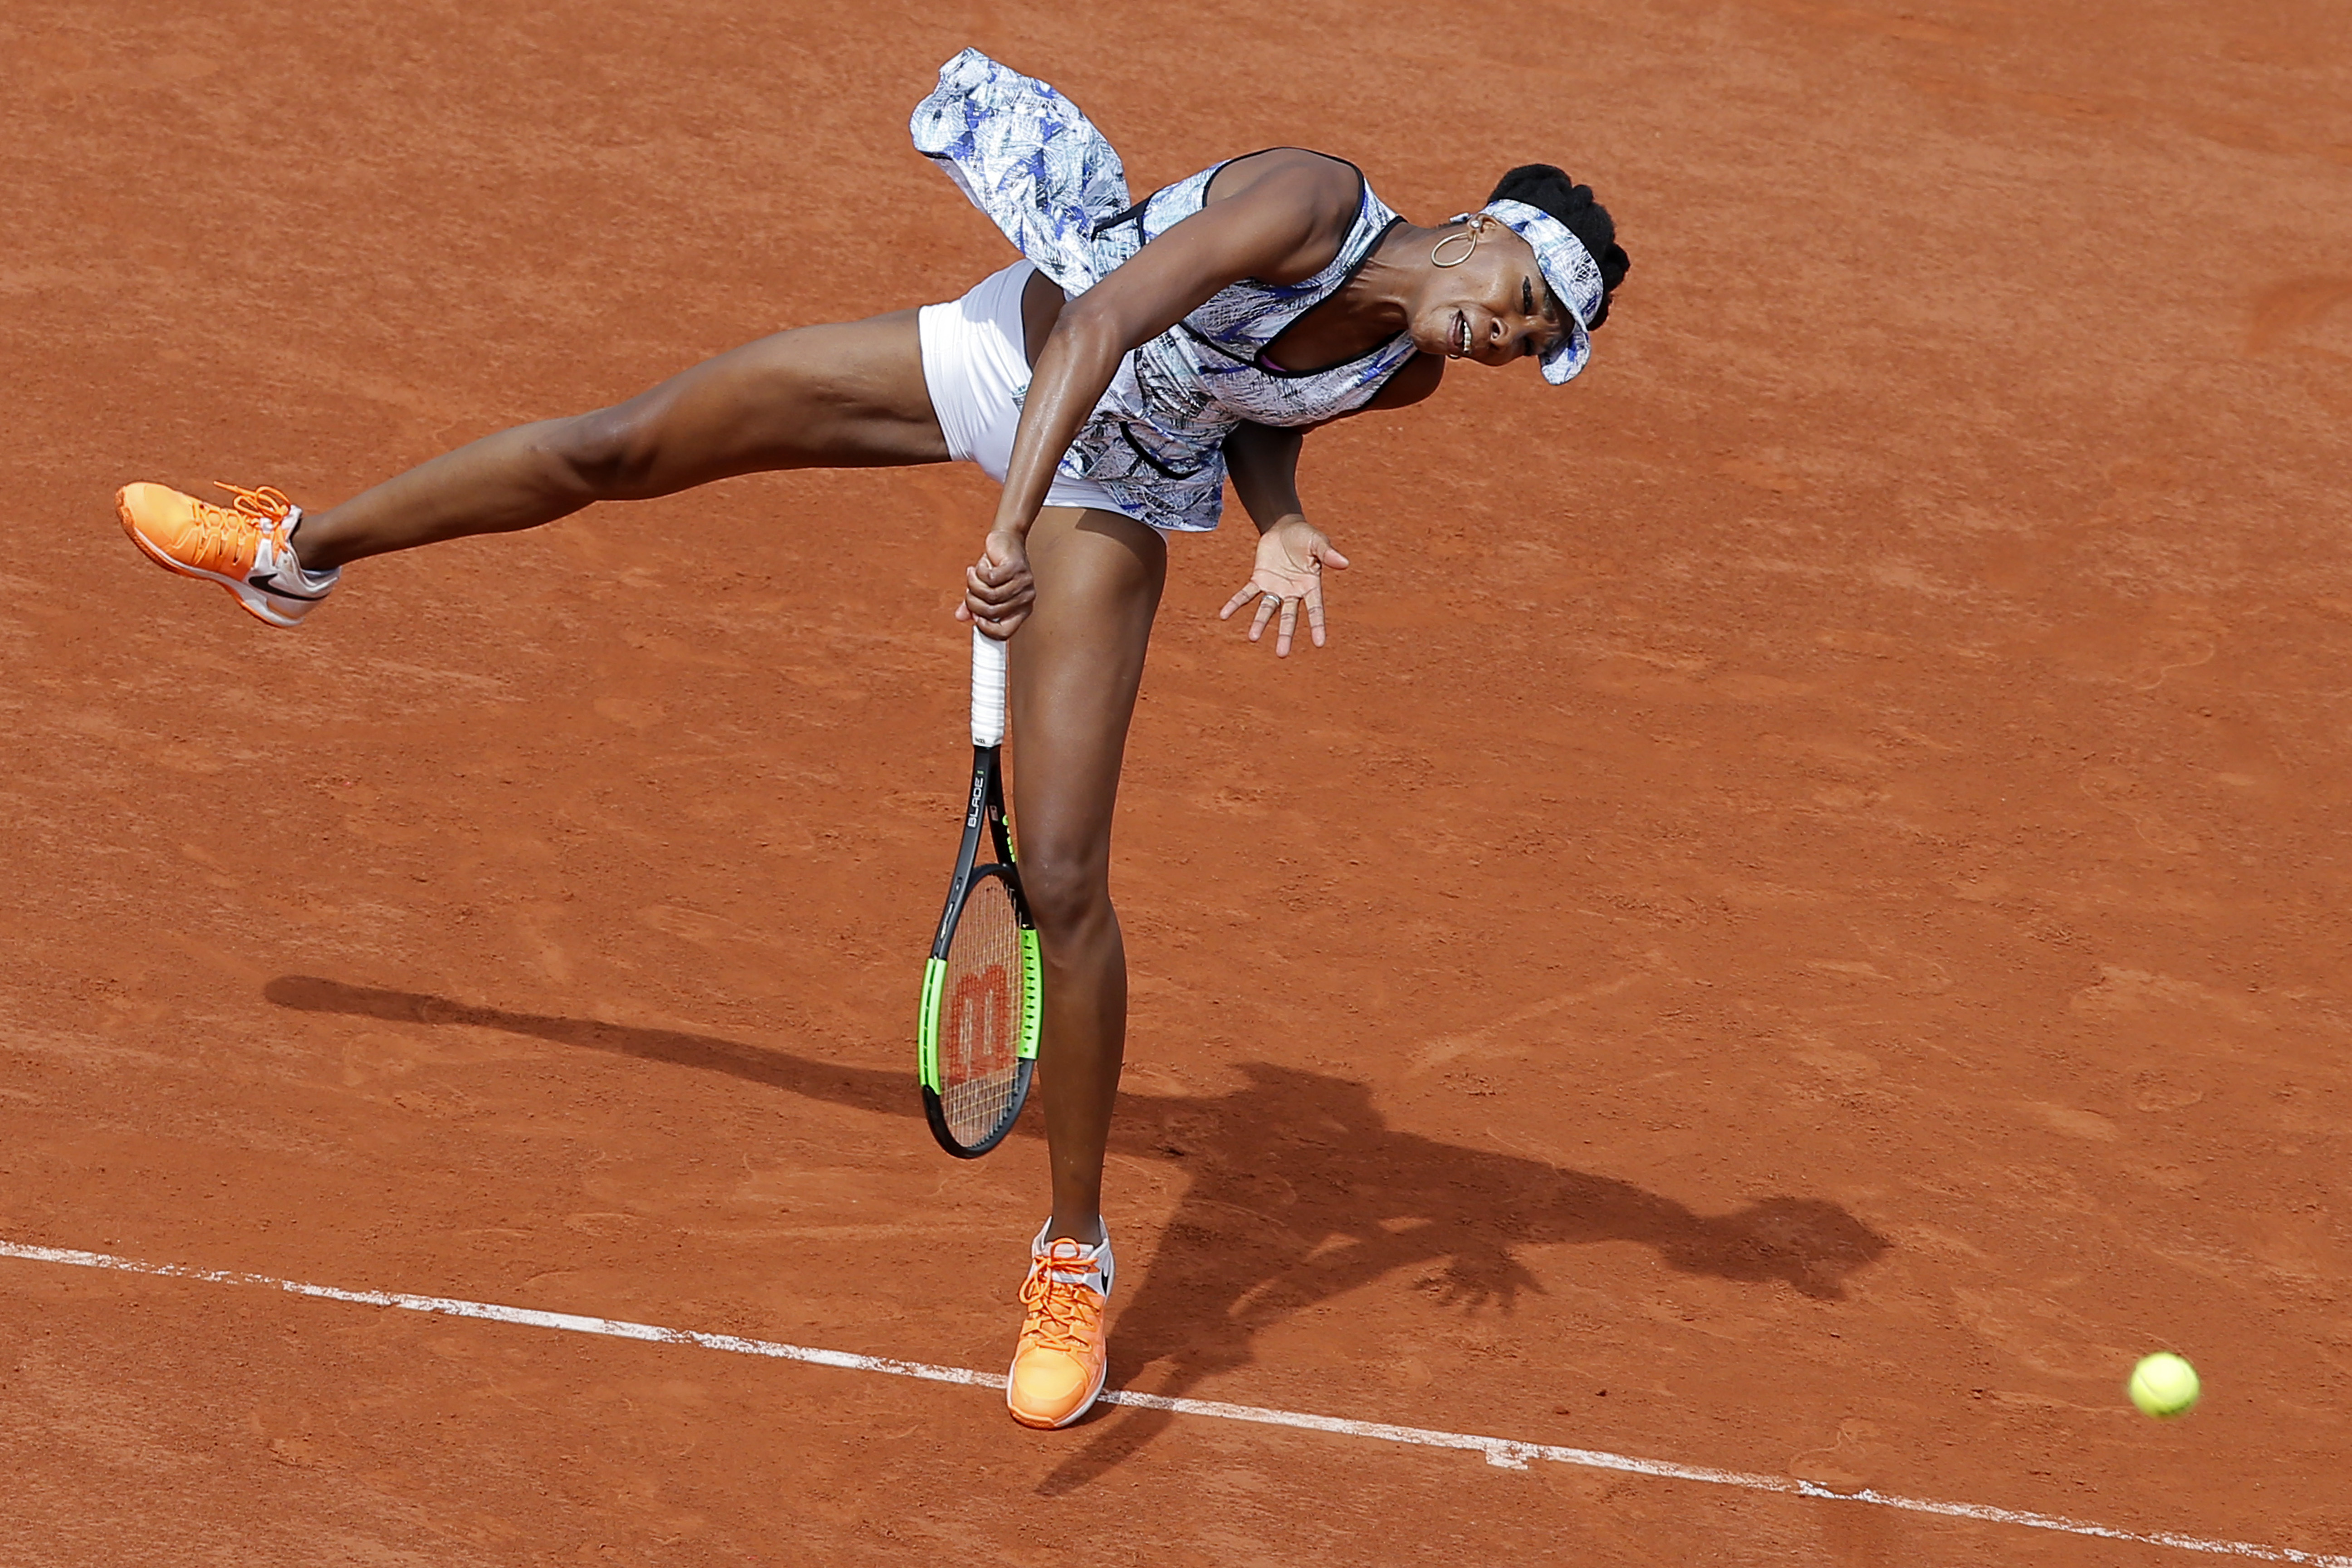 Venus Williams of the U.S. serves against Timea Bacsinszky of Switzerland during their fourth round match of the French Open tennis tournament at the Roland Garros stadium, in Paris, France. Sunday, June 4, 2017. (AP Photo/Michel Euler)